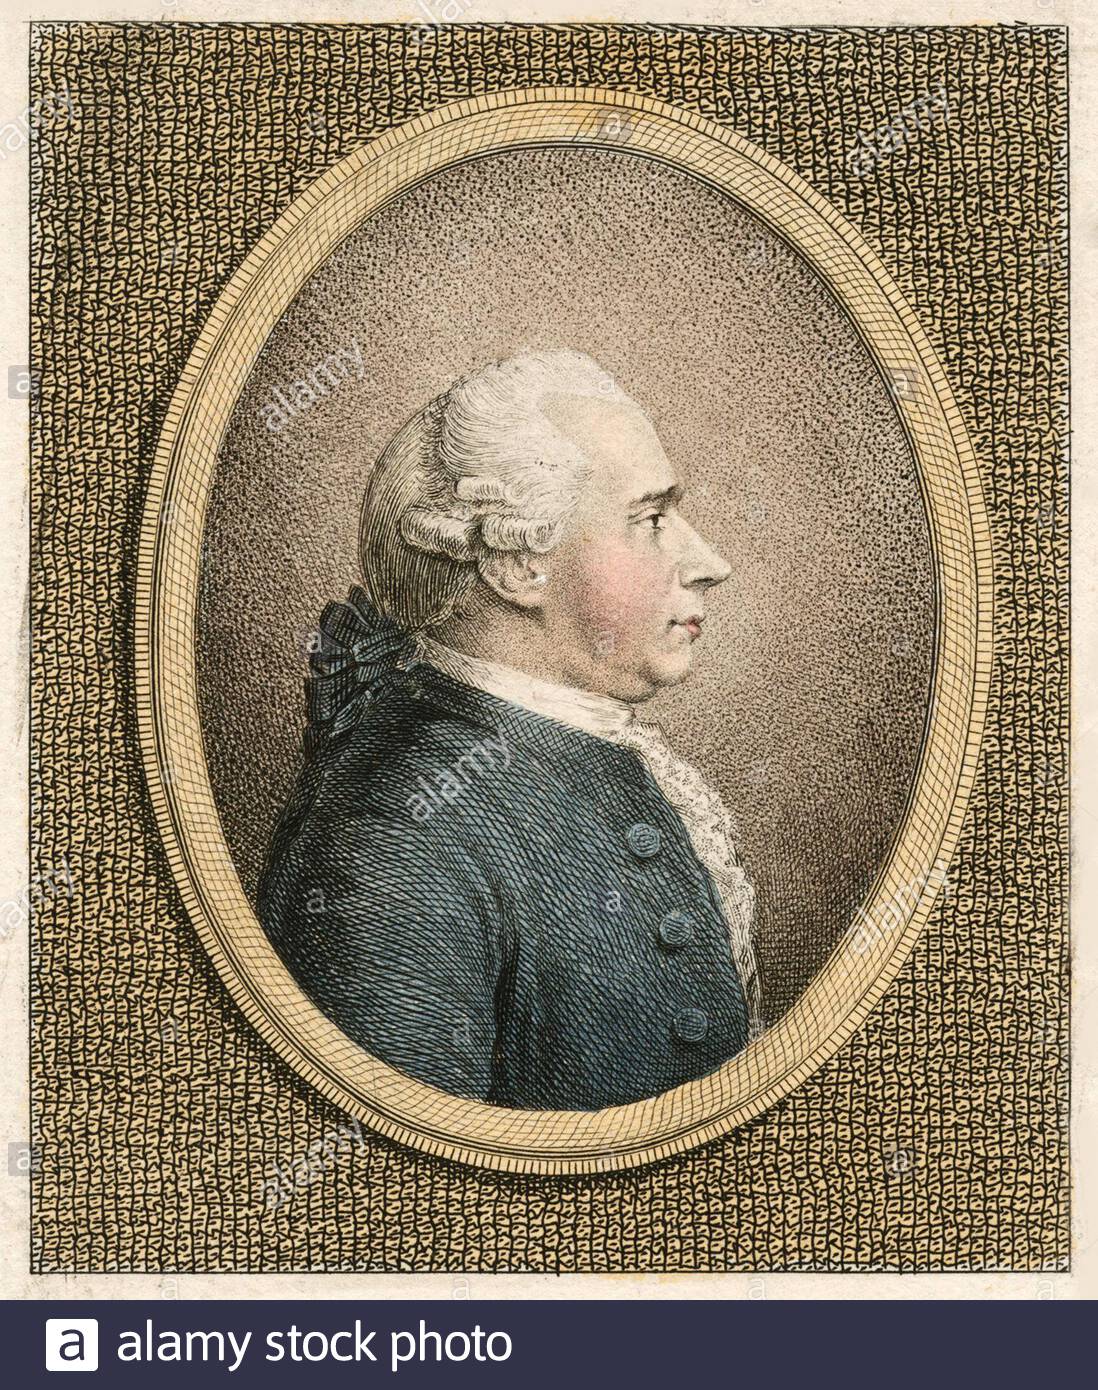 Silas Deane portrait, 1738 – 1789, was an American merchant, politician, and diplomat, and a supporter of American independence, vintage illustration from 1700s Stock Photo